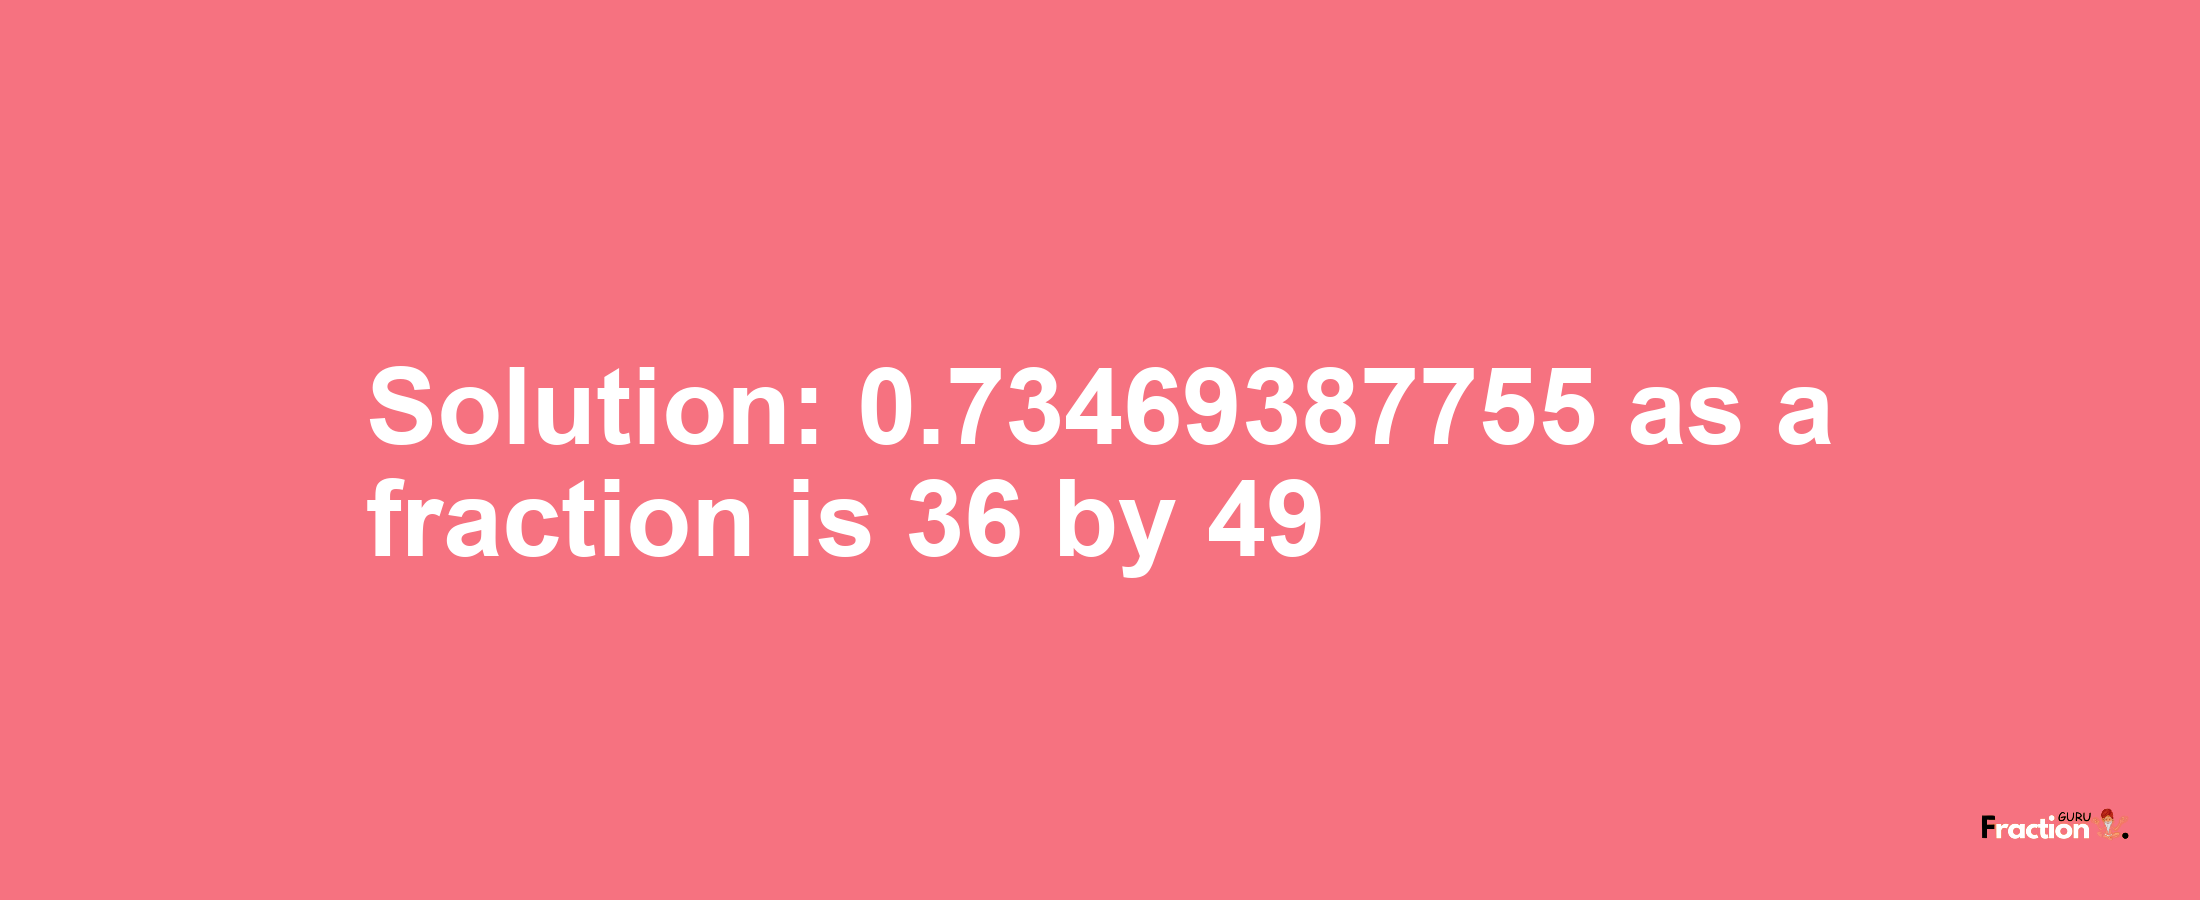 Solution:0.73469387755 as a fraction is 36/49